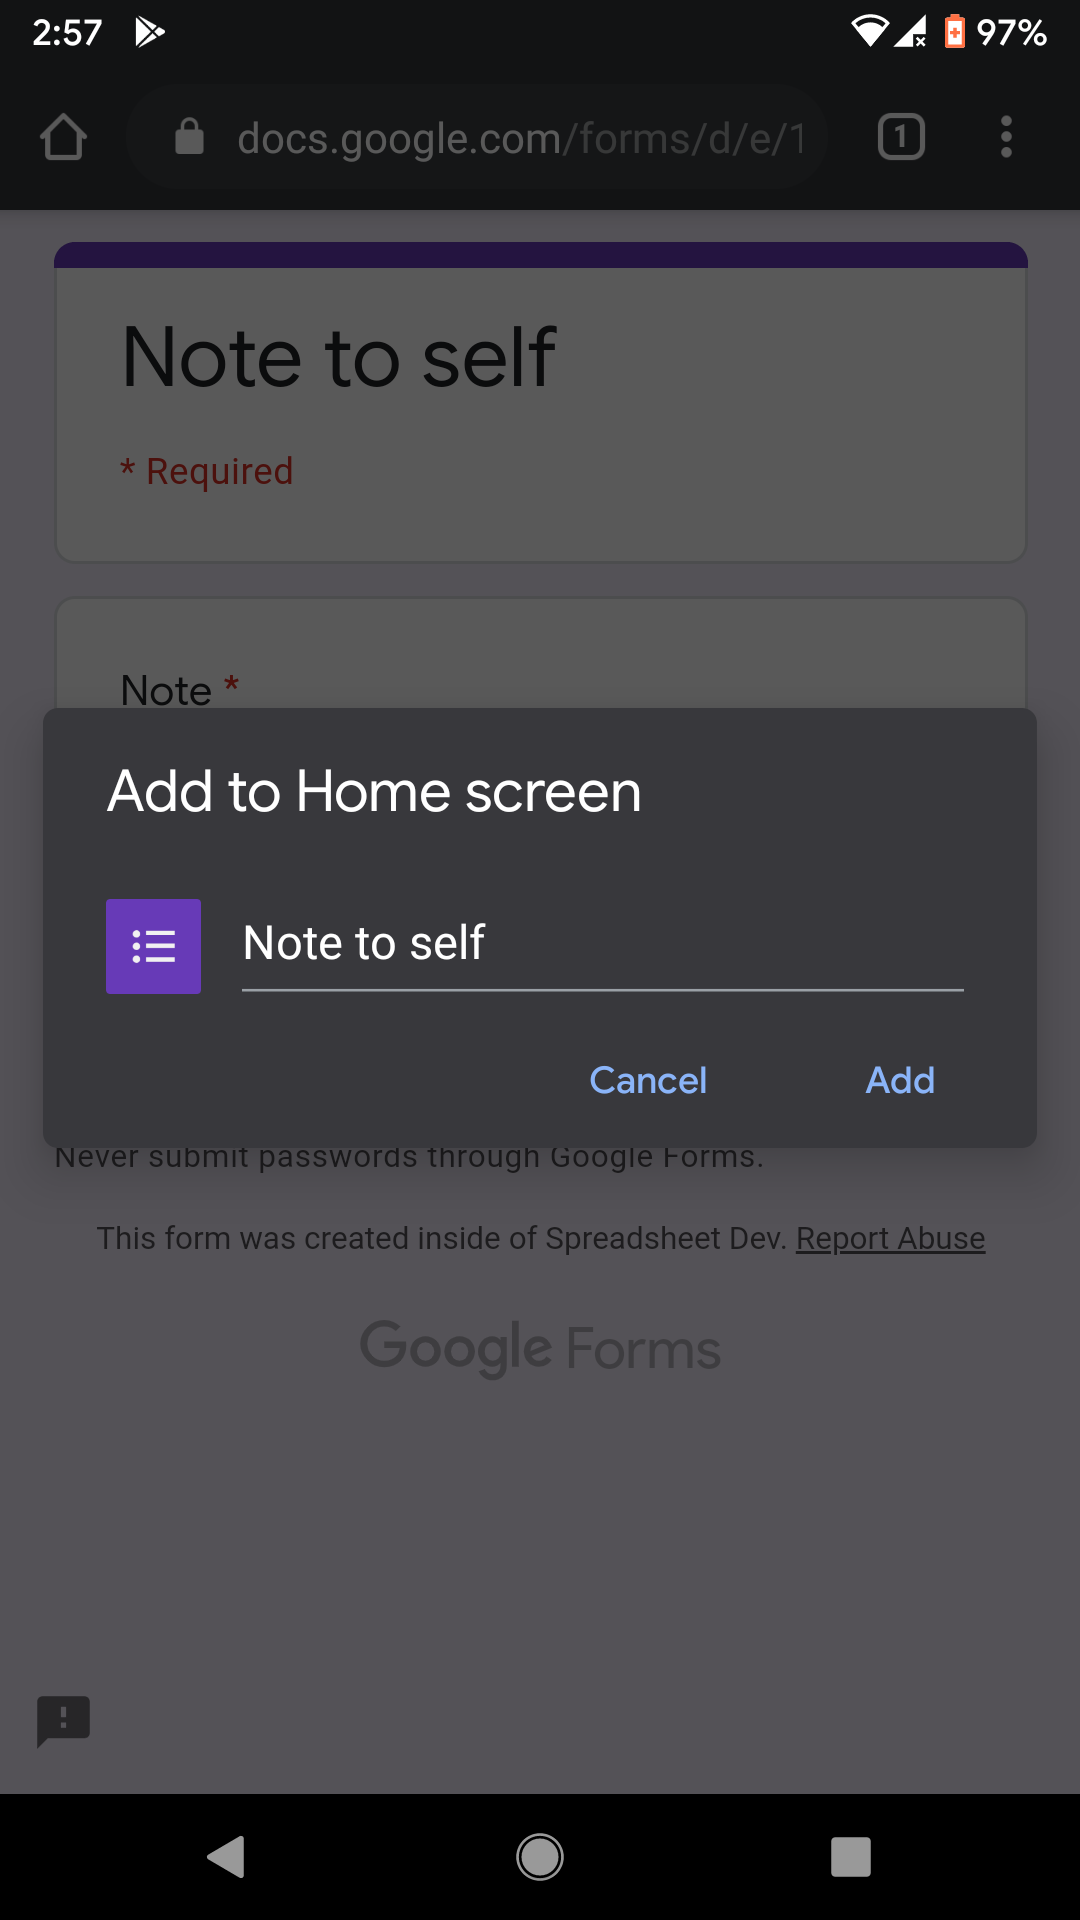 Screenshot of the "Add to Home screen" dialog in Google Chrome on an Android phone.